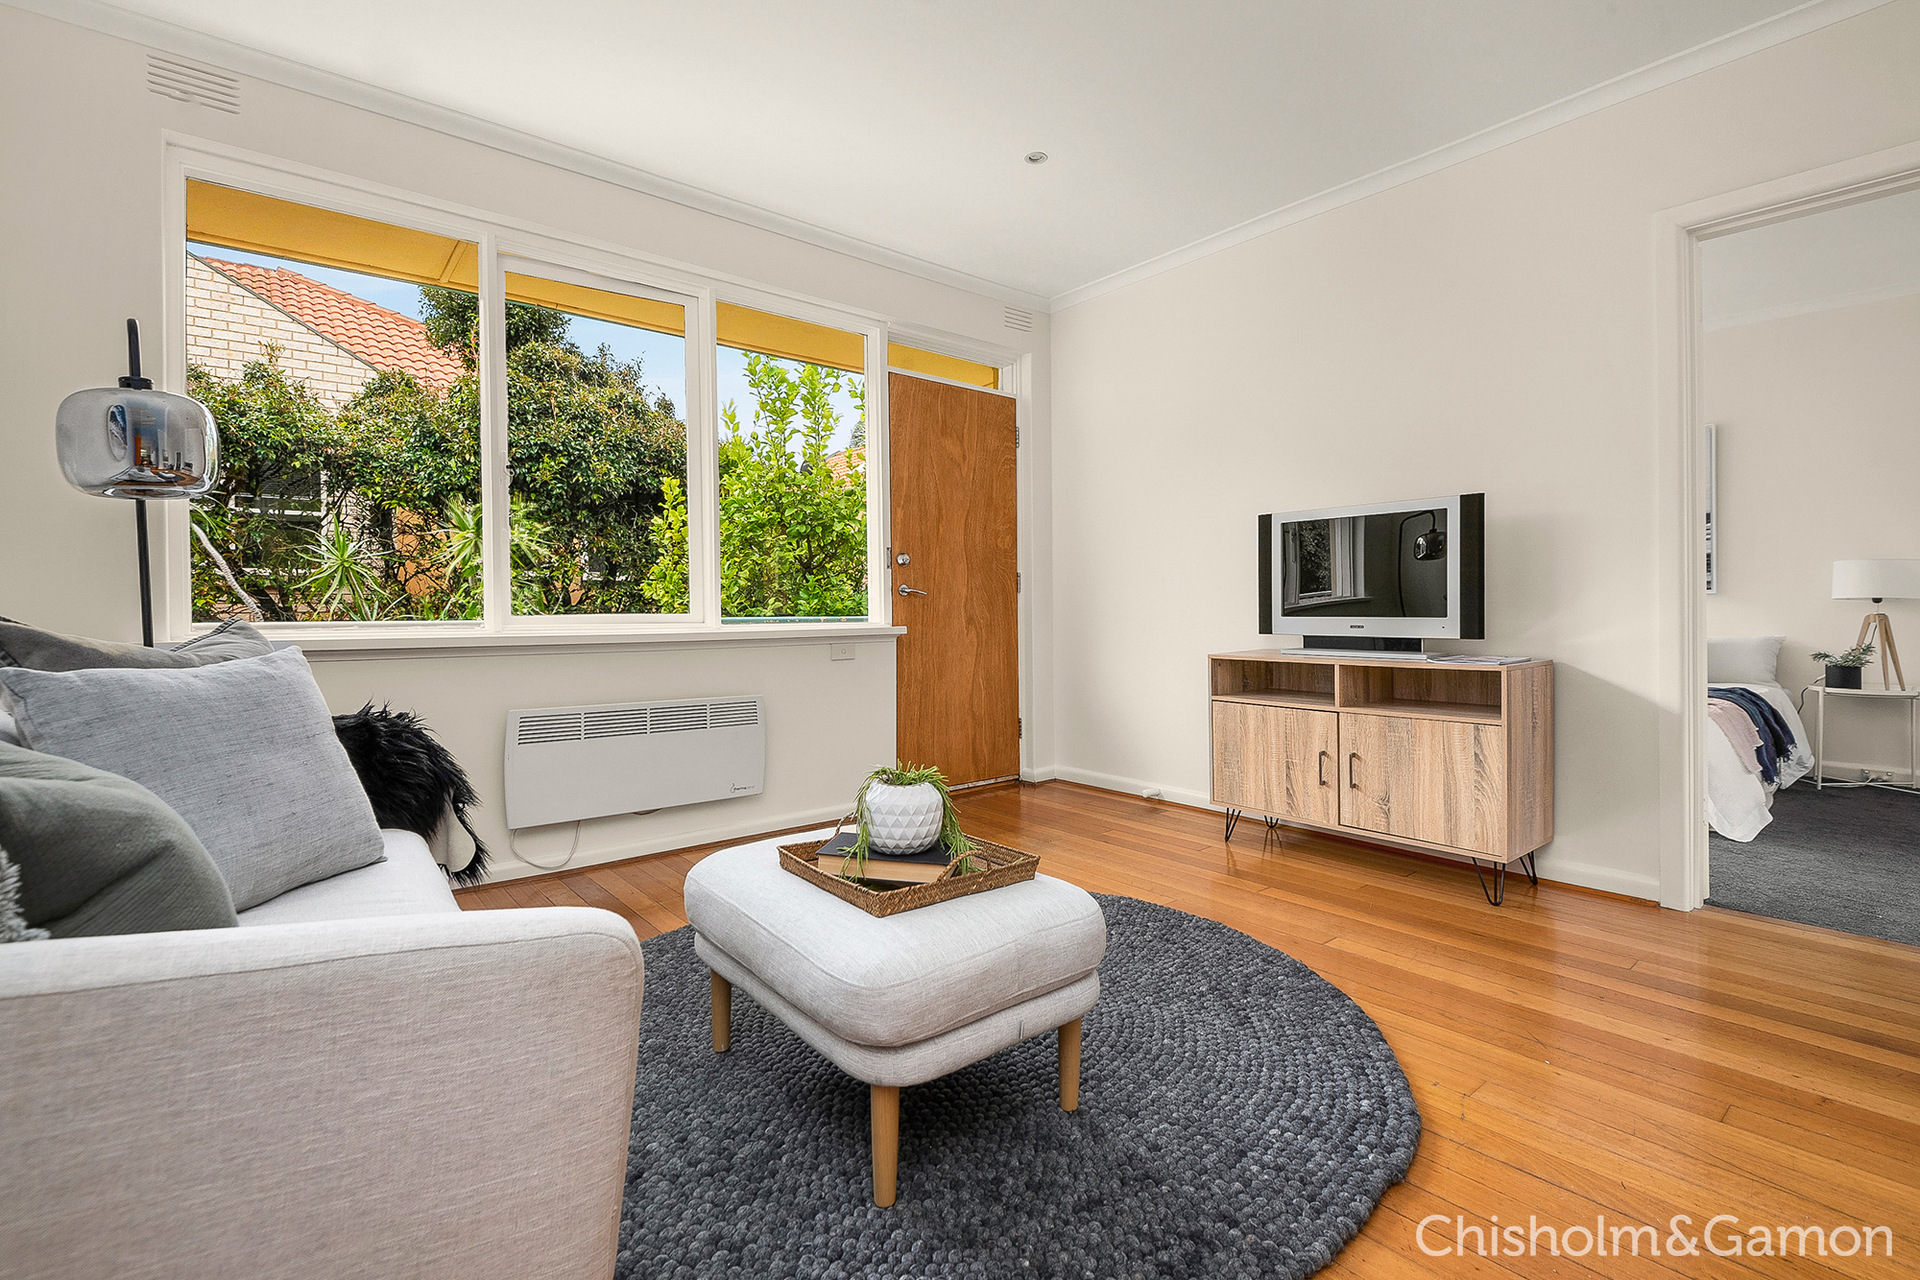 2 Bedroom Apartments For Sale In Elwood Vic 3184 Homely